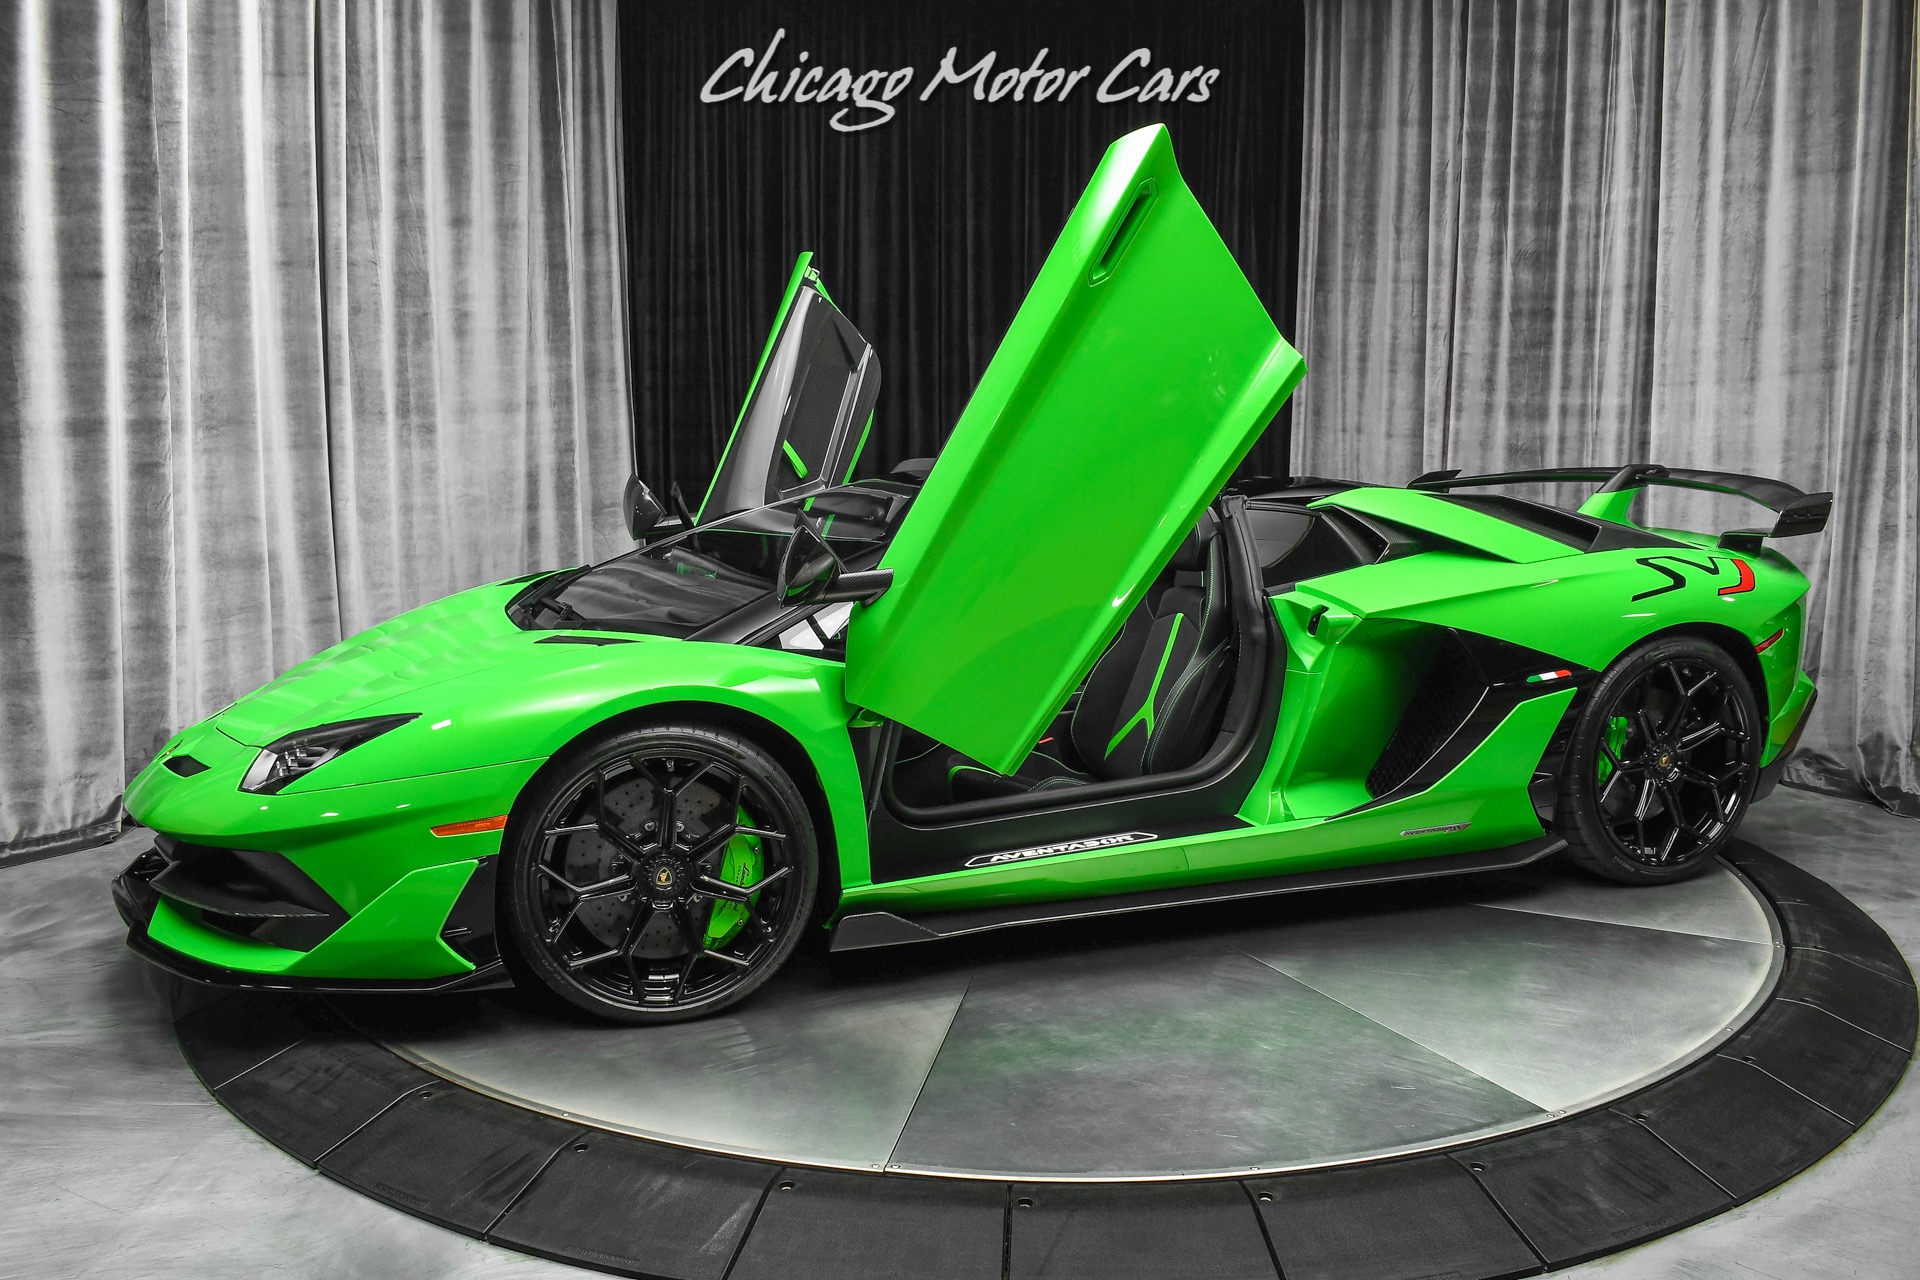 Used 2021 Lamborghini Aventador SVJ LP770-4 Roadster Verde Mantis Pearl  Effect ONLY 104 Miles! RARE! LOADED For Sale (Special Pricing) | Chicago  Motor Cars Stock #18040